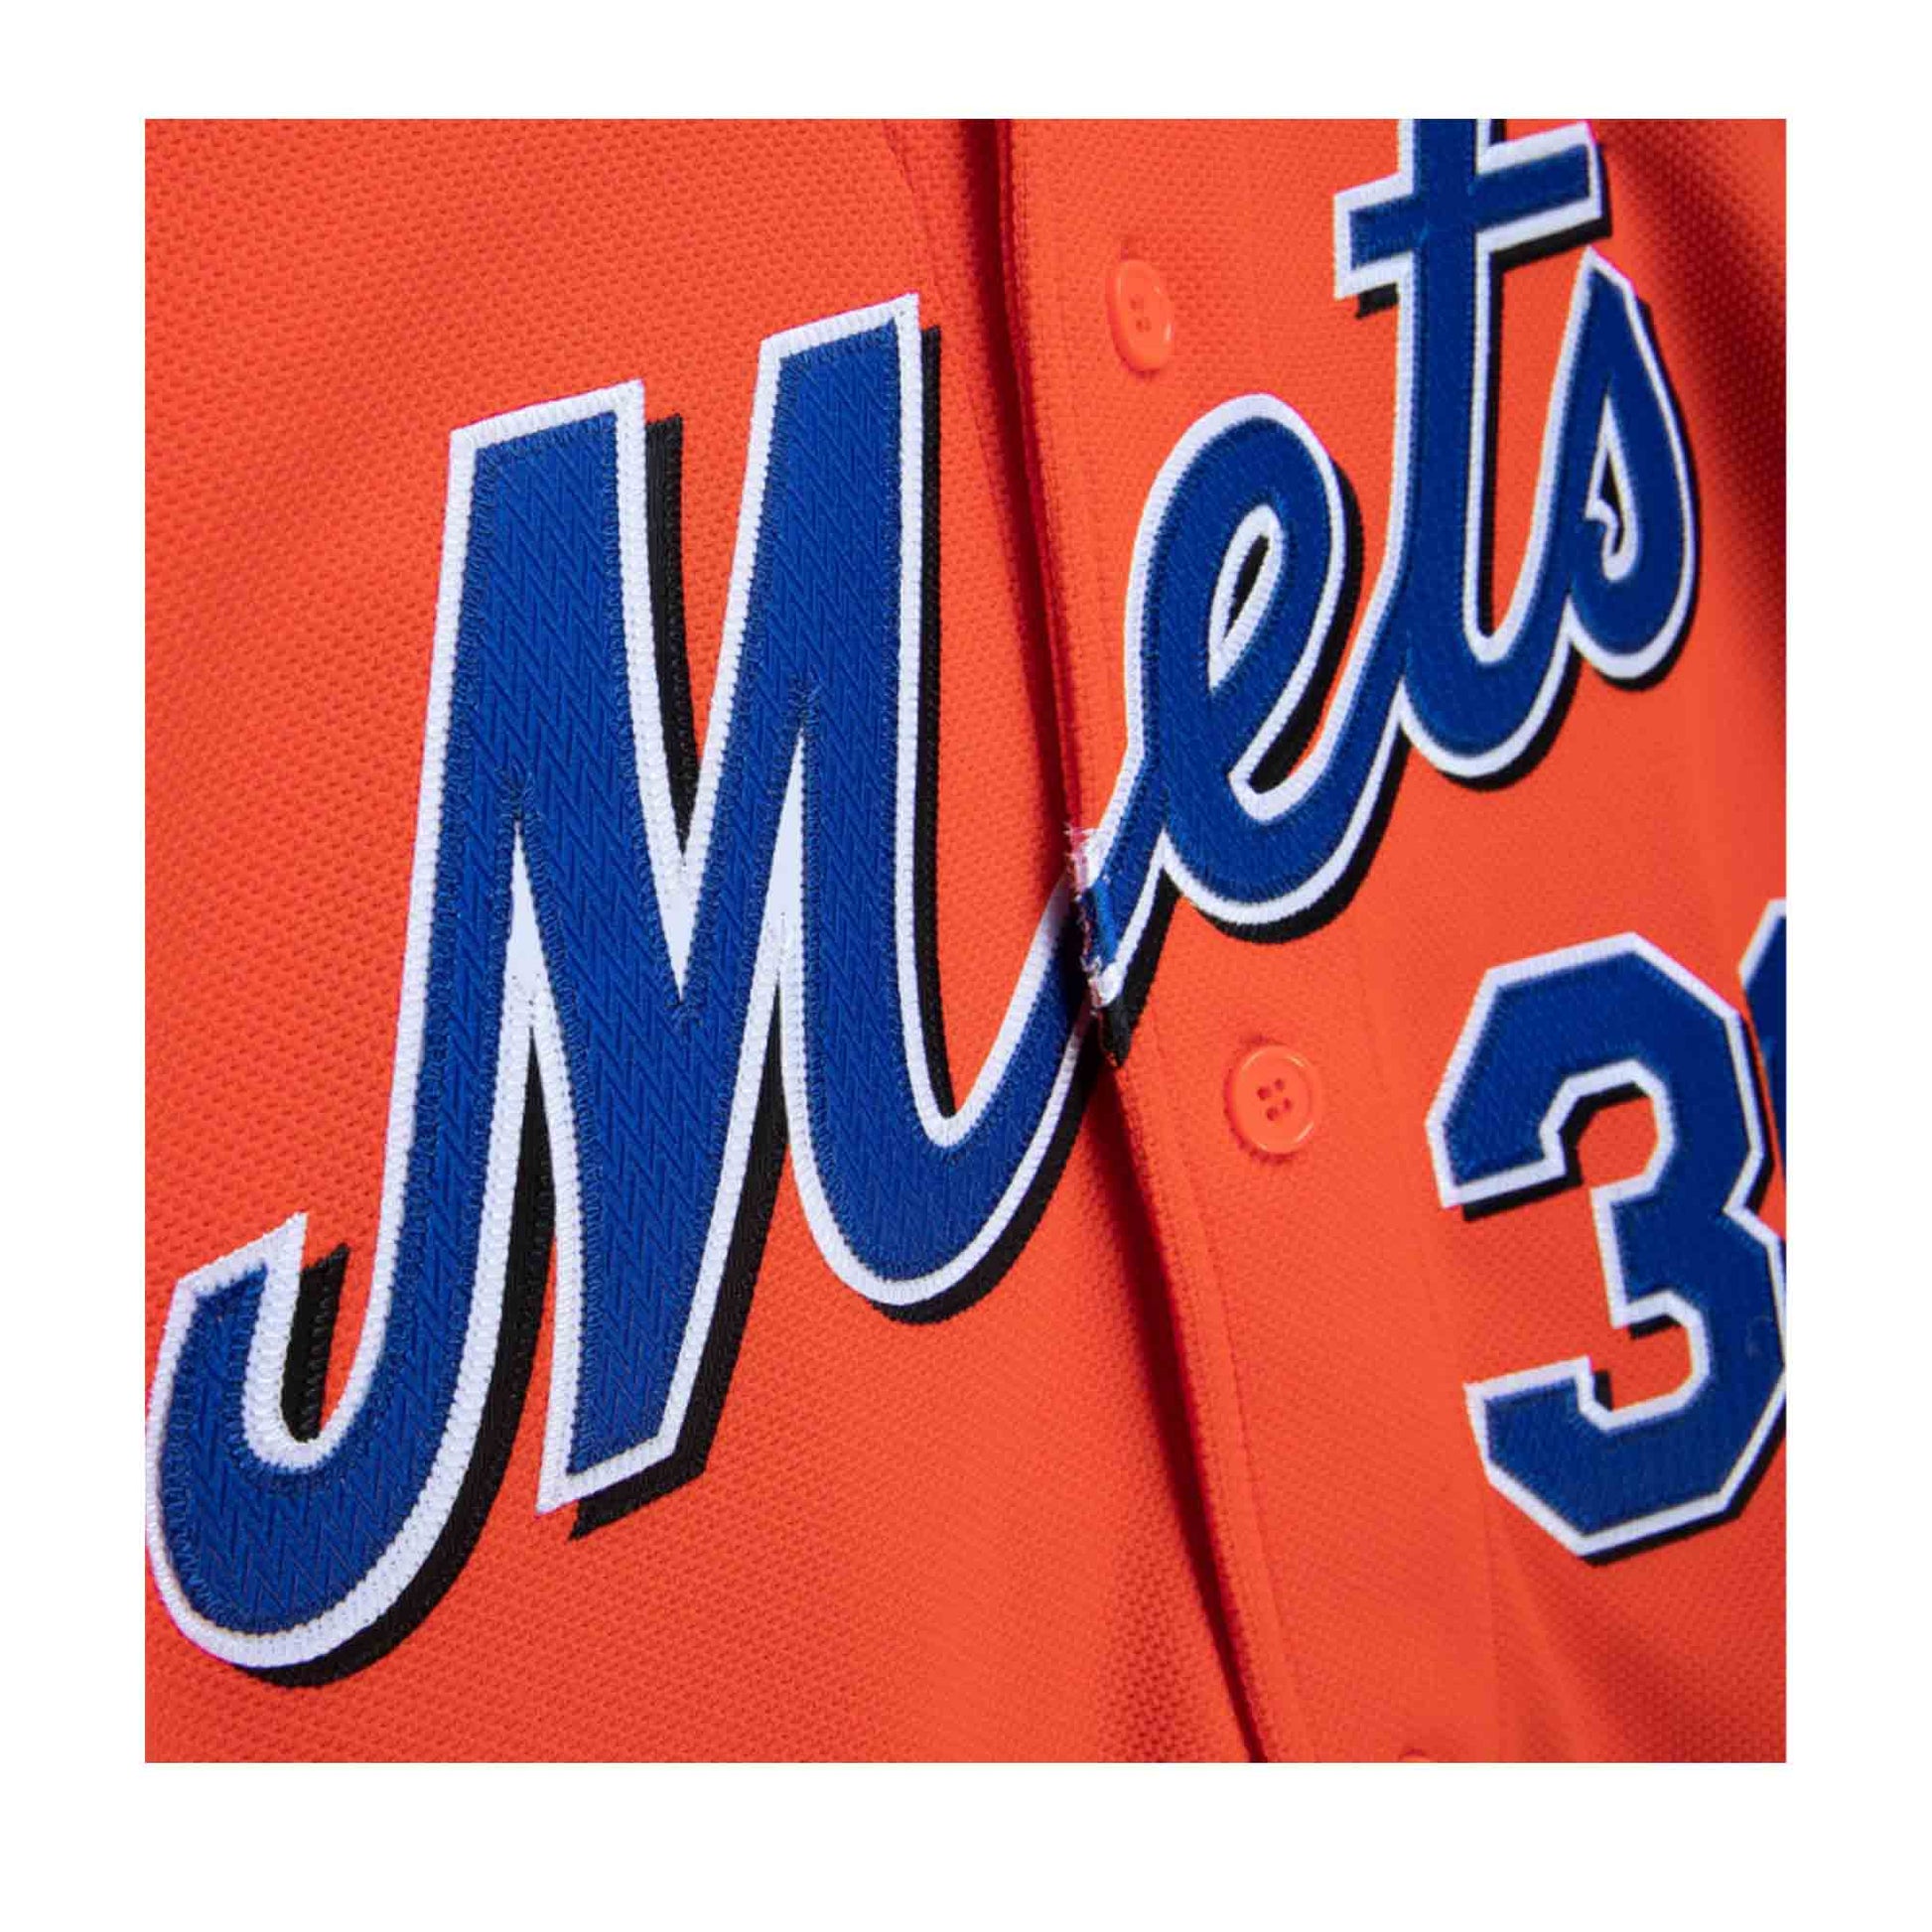 Retro Mets Majestic Striped Jersey Mike Piazza Large 